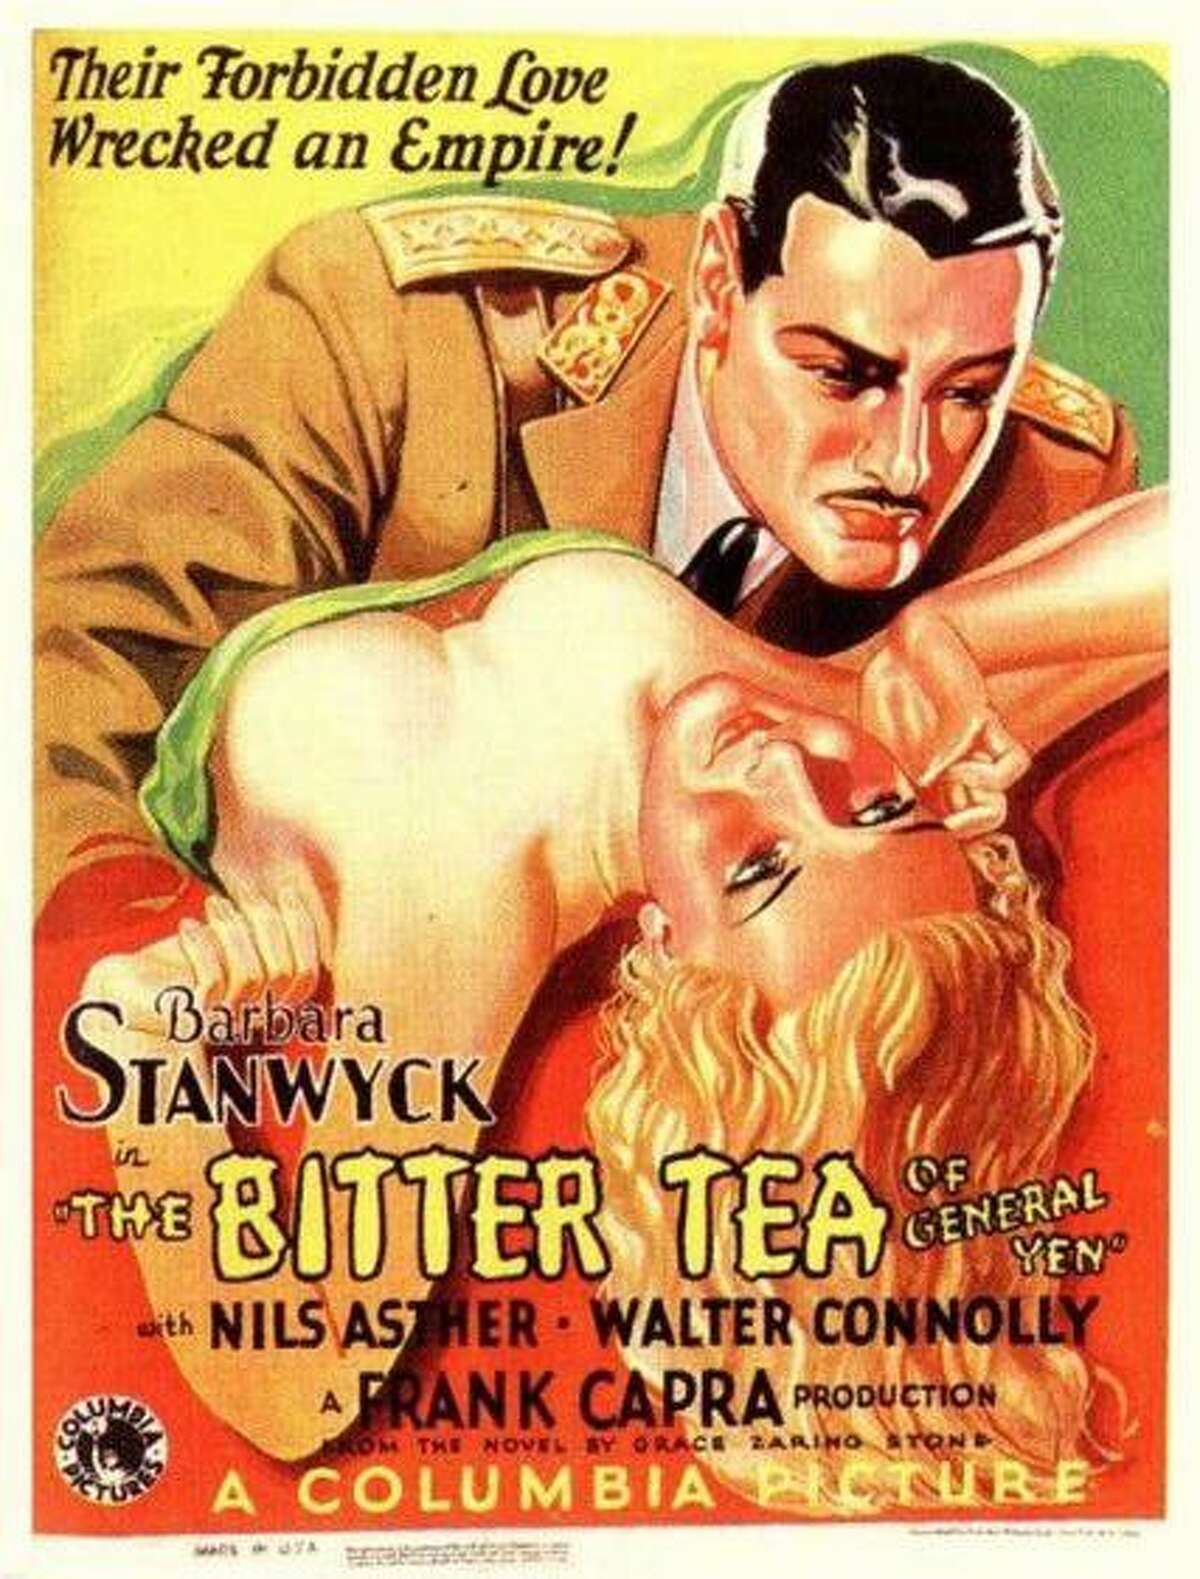 “The Bitter Tea of General Yen,” a Columbia Pictures film of 1933, starred Barbara Stanwyck as Megan Davis and Nils Asther as General Yen.